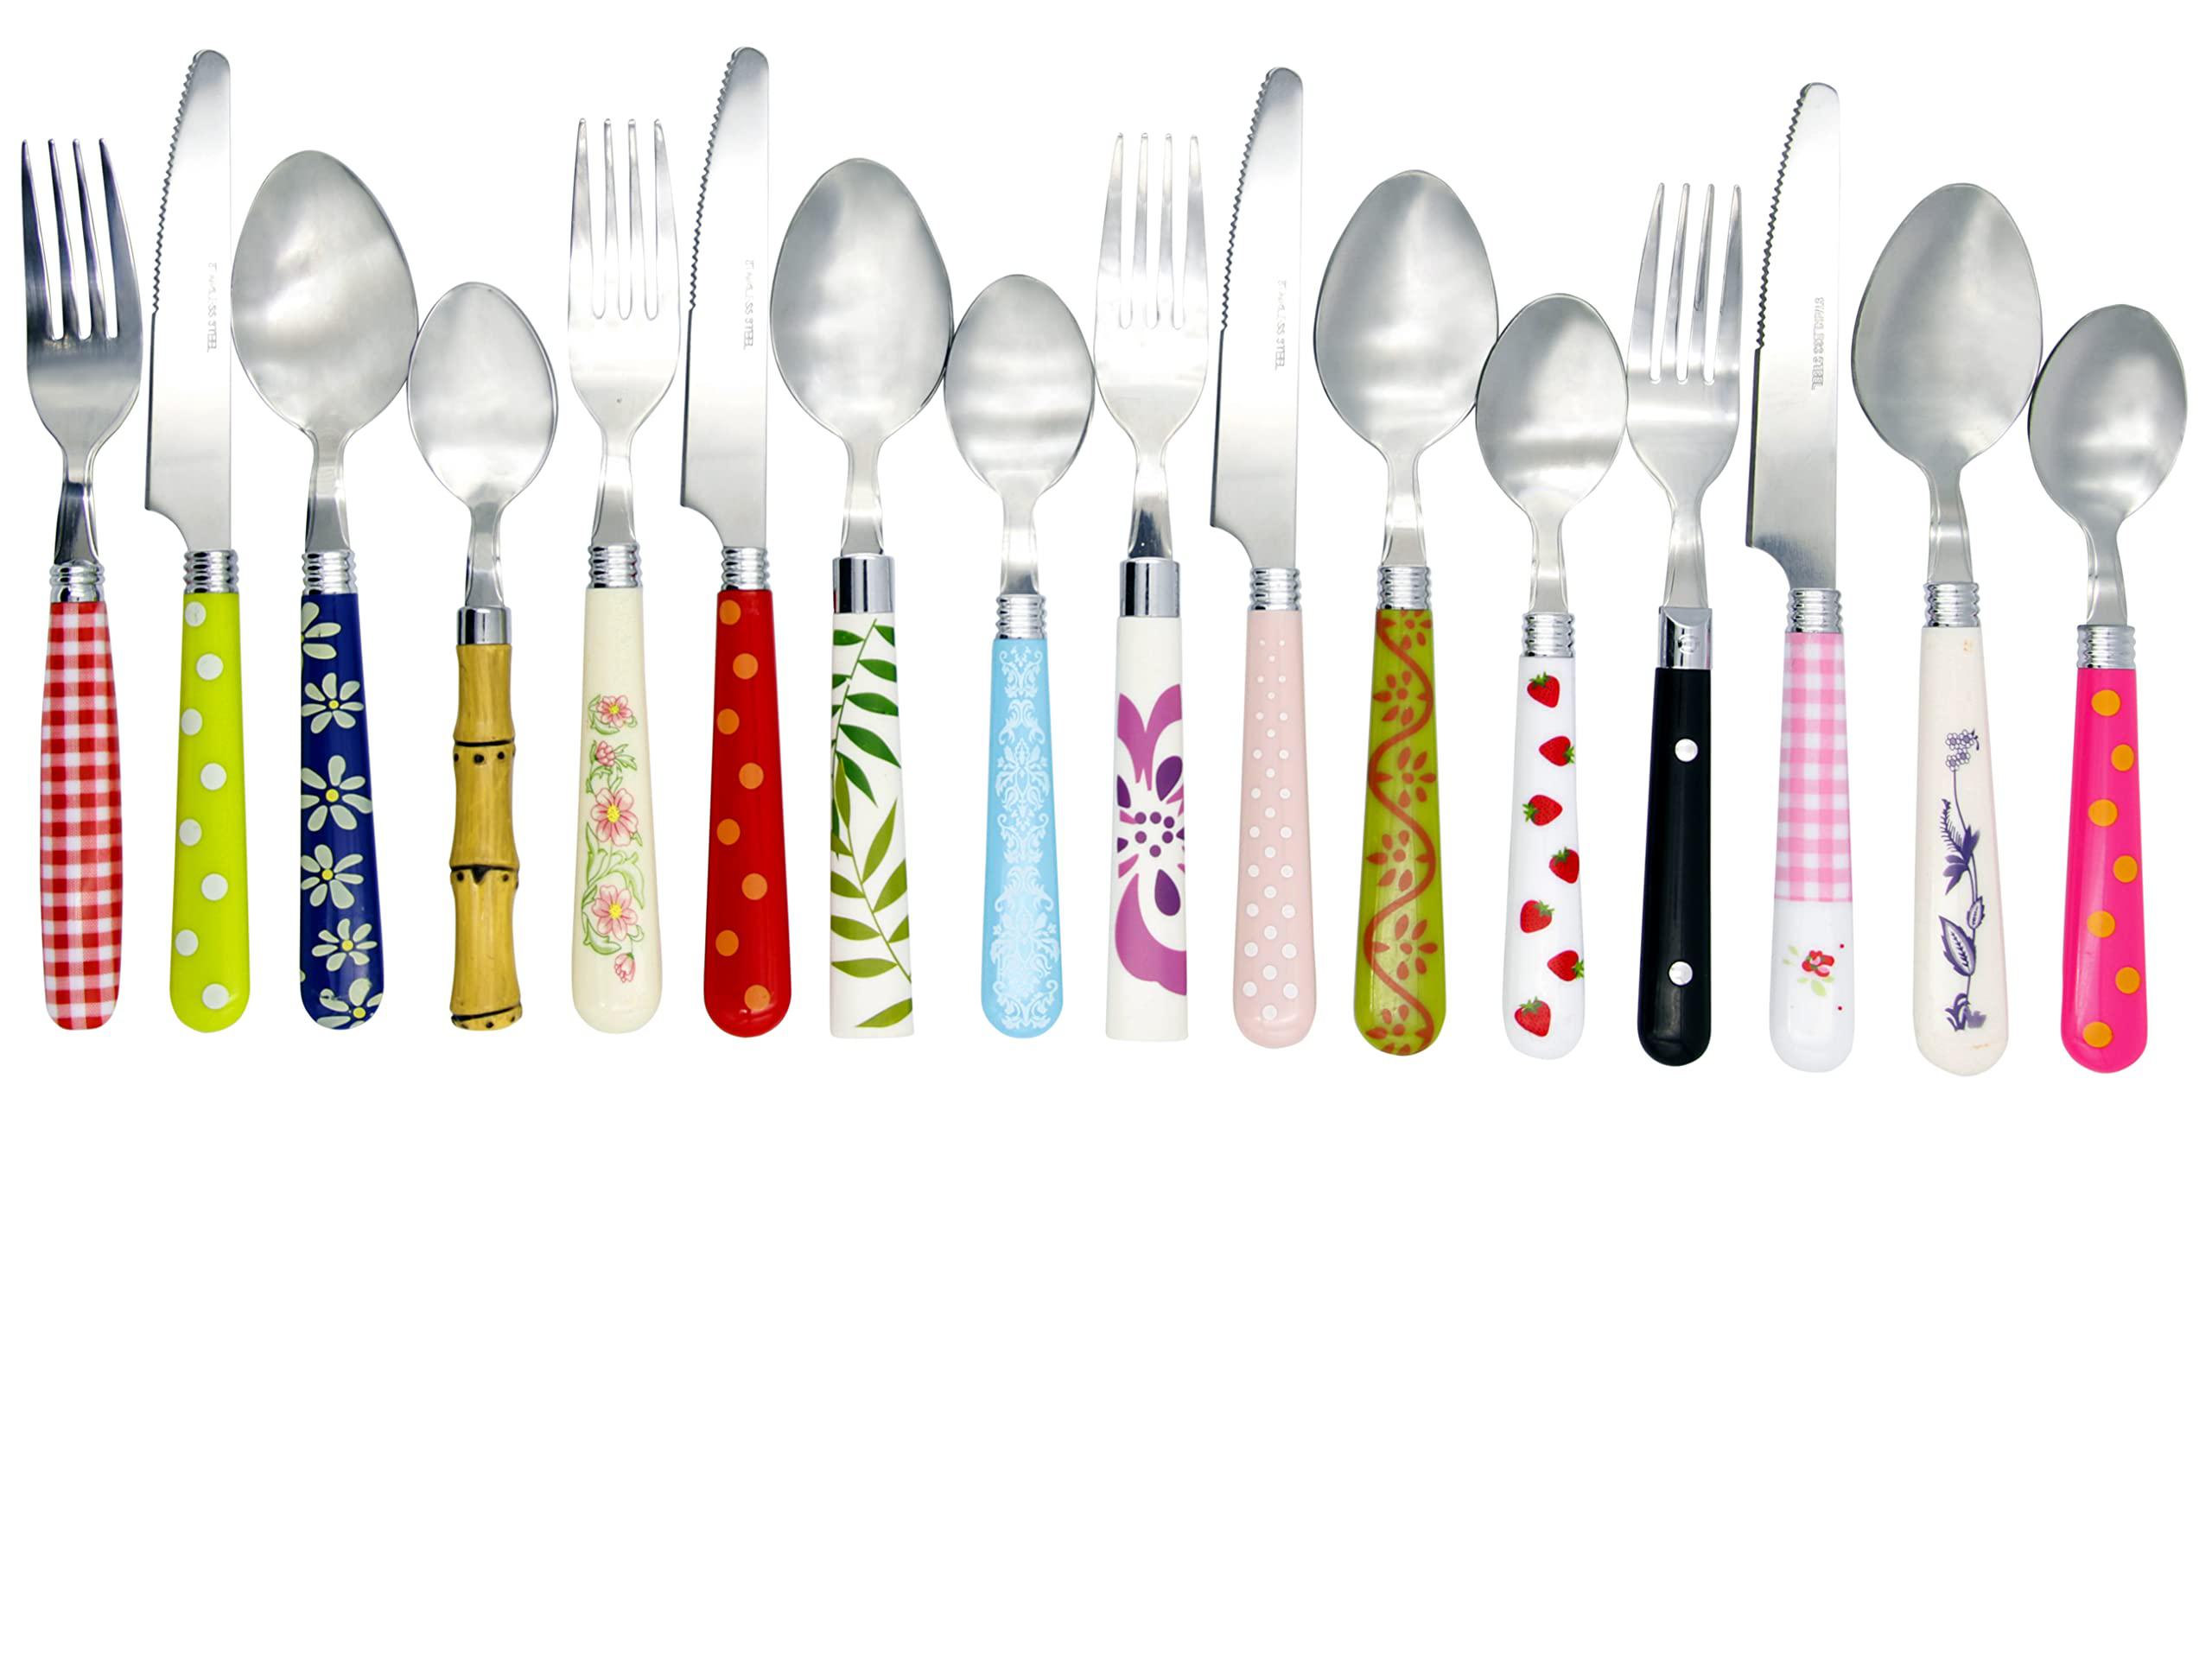 Gypsy Color the original gypsy color rainbow eclectic collection flatware mix & match cutlery set and eating utensils with translucent ha